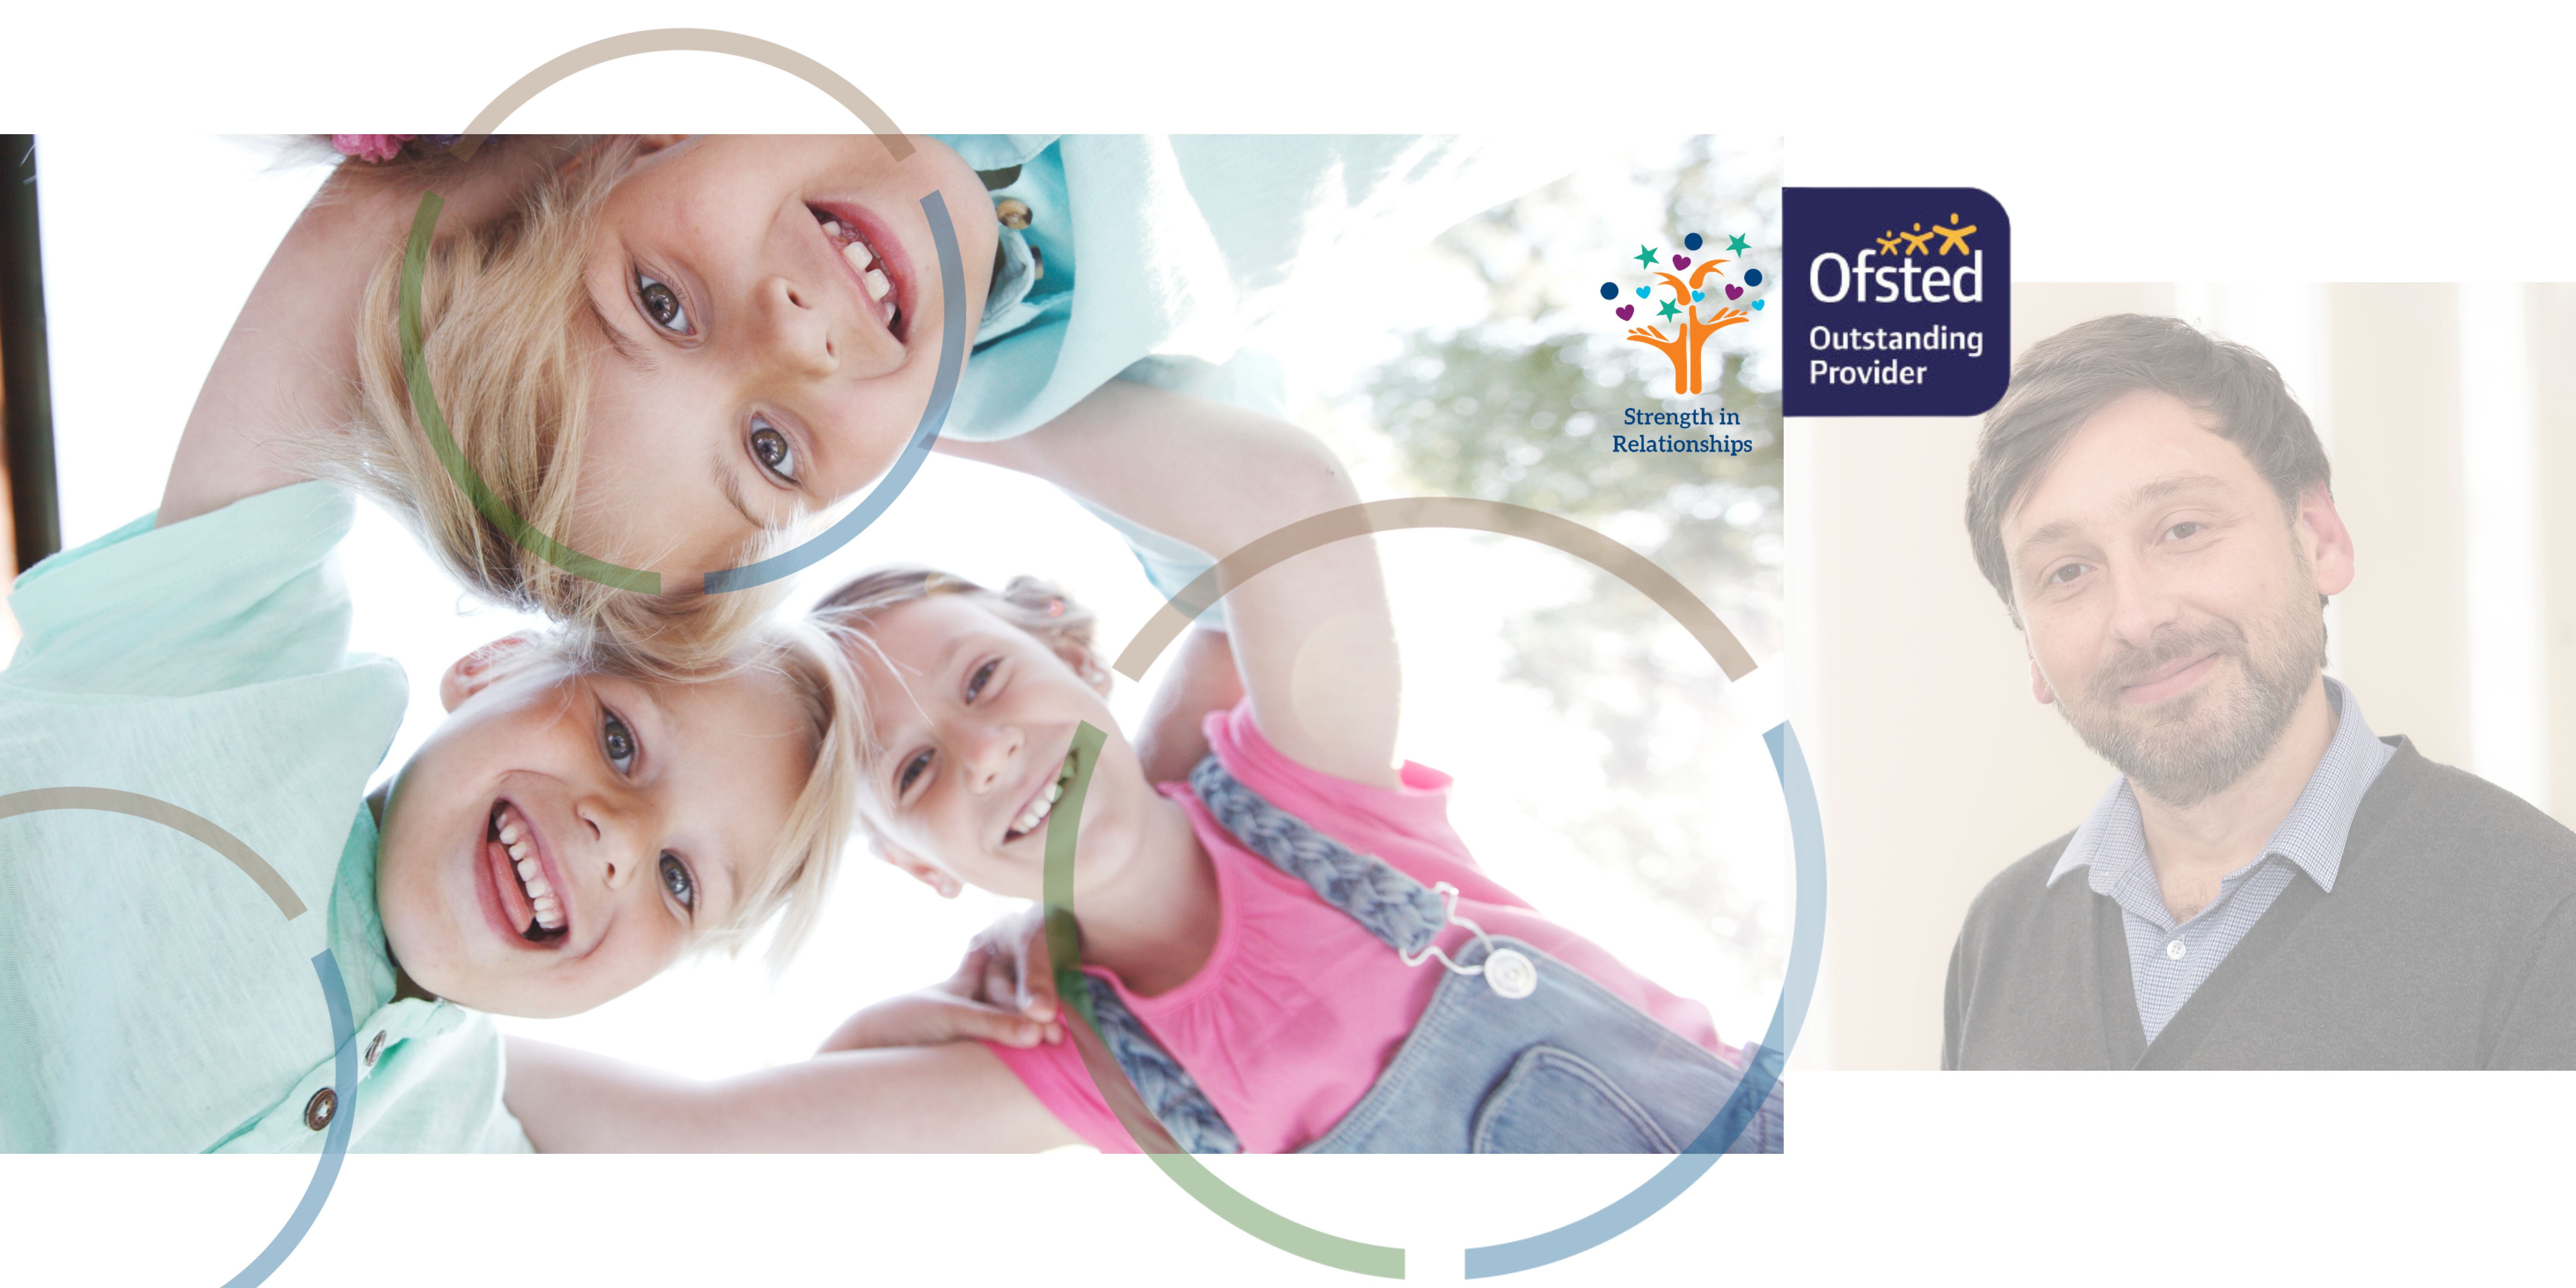 An image of children linking arms and smiling next to a portrait photograph of a member of the children and families social work team with the Ofsted and strength in partnerships logos.